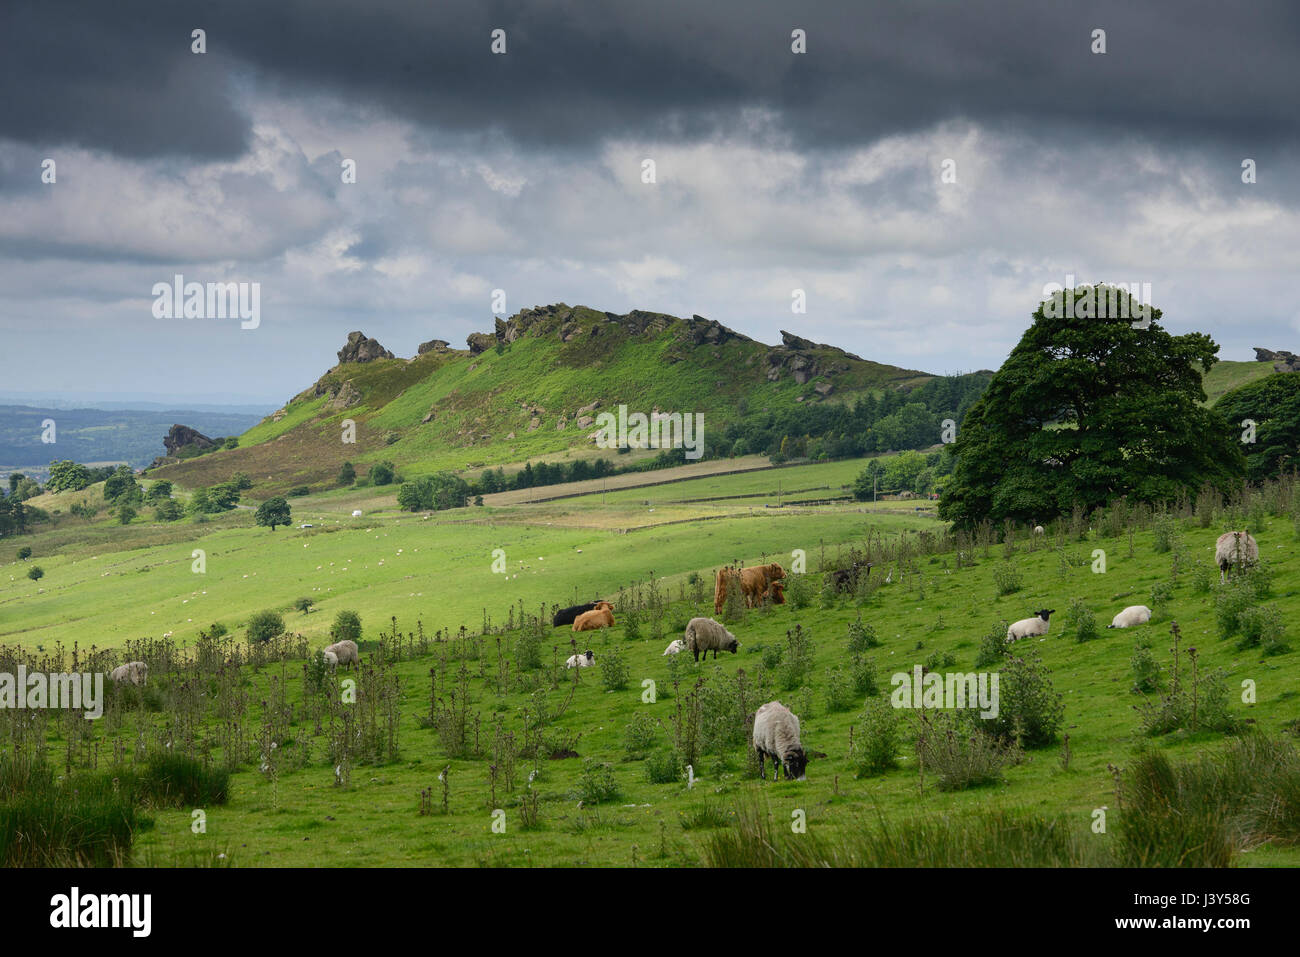 The Roaches, a prominent rocky ridge situated above Leek and Tittesworth Reservoir in the Peak District of England. The ridge with its spectacular roc Stock Photo